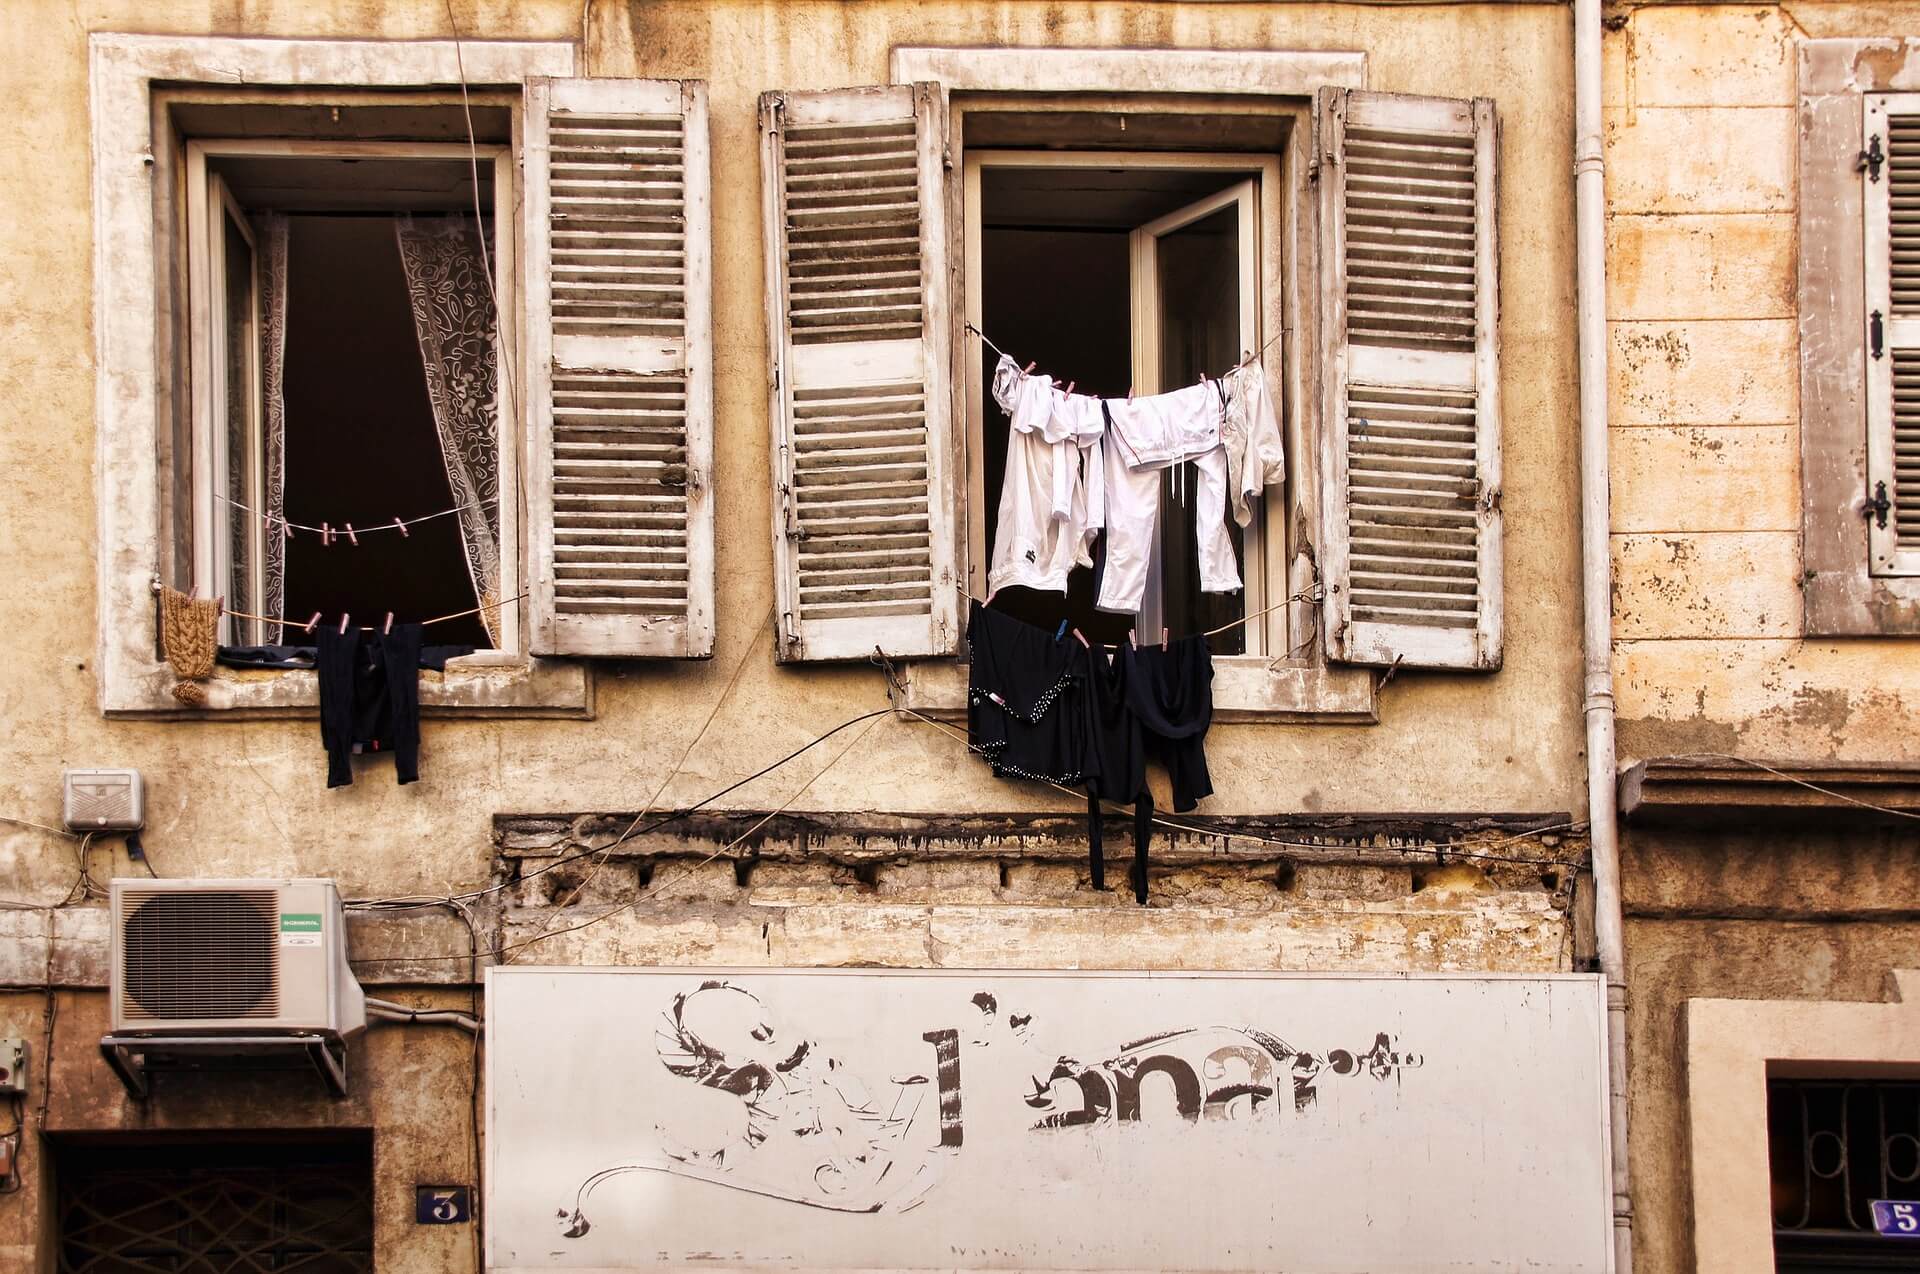 Washing hanging in the windows of a stone building with open shutters